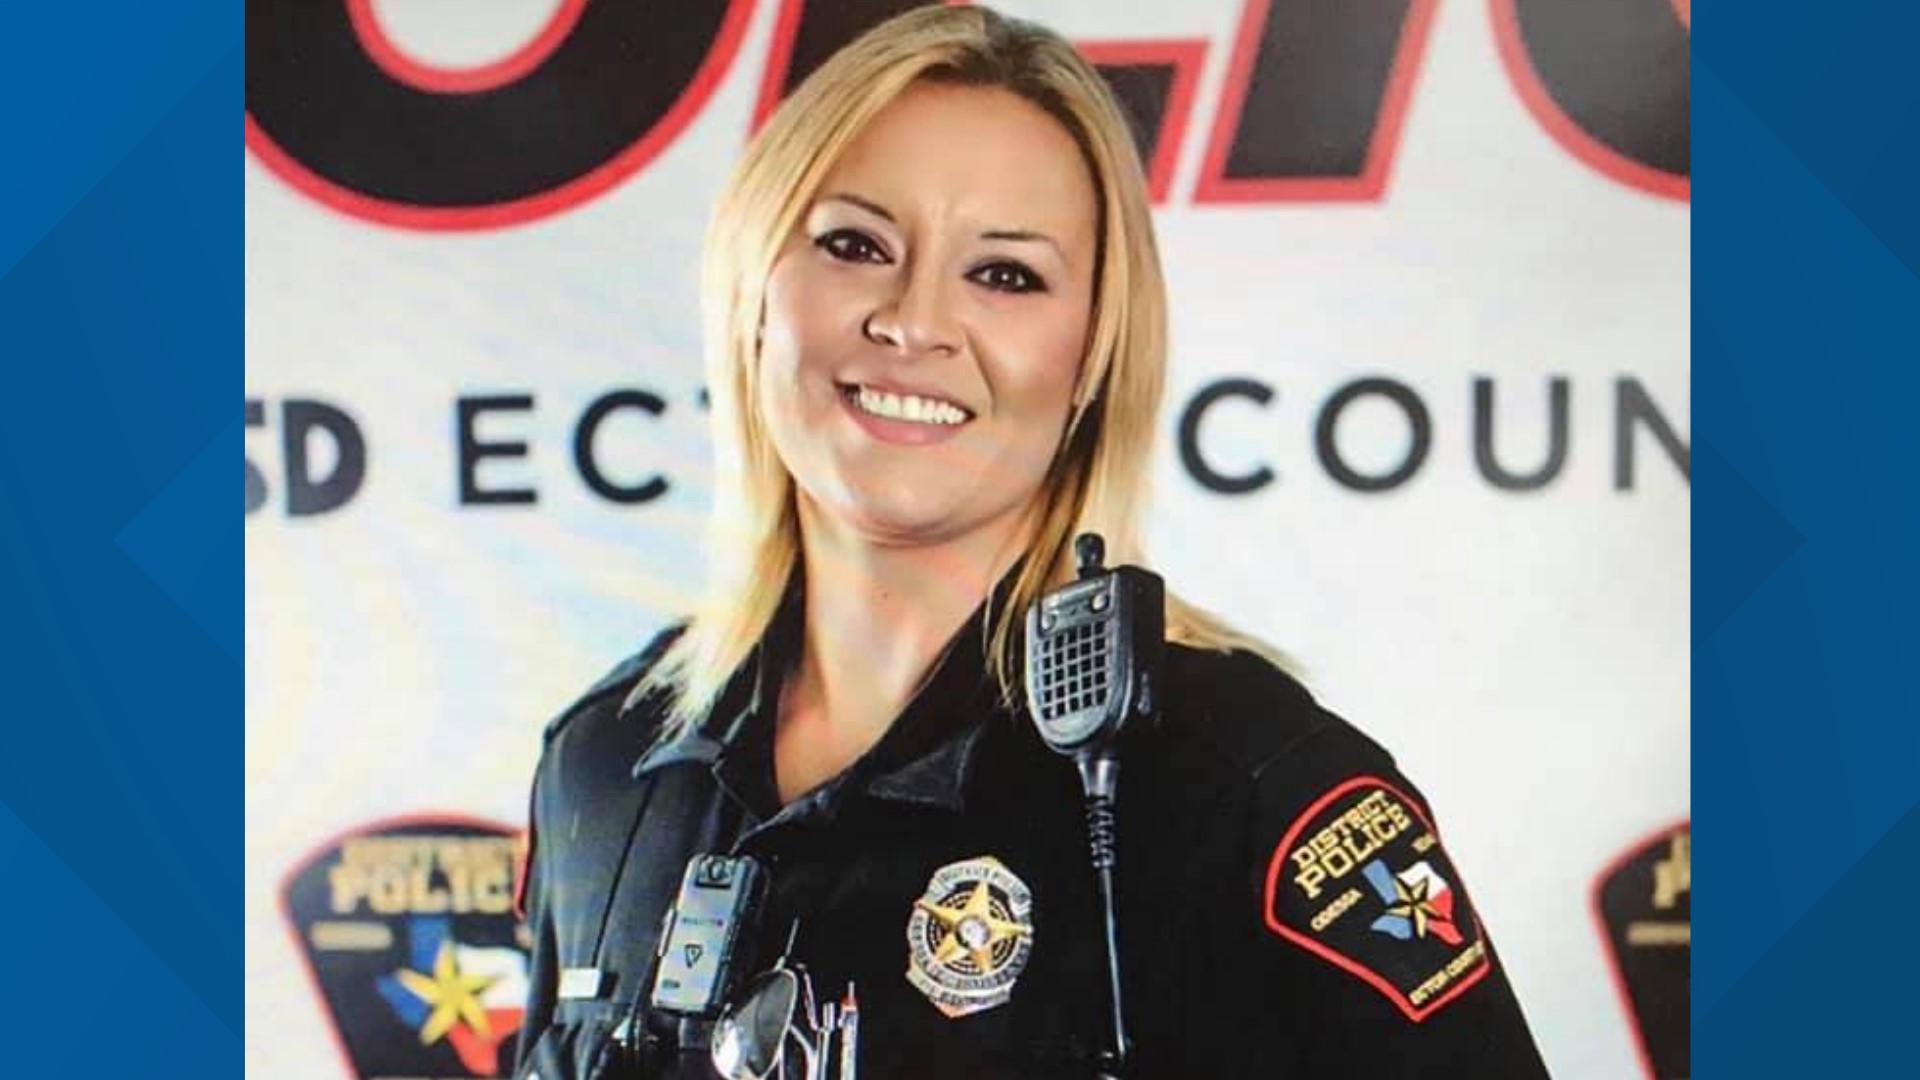 Officer Misti Waldrop had been fighting lung cancer after being diagnosed in late 2017.